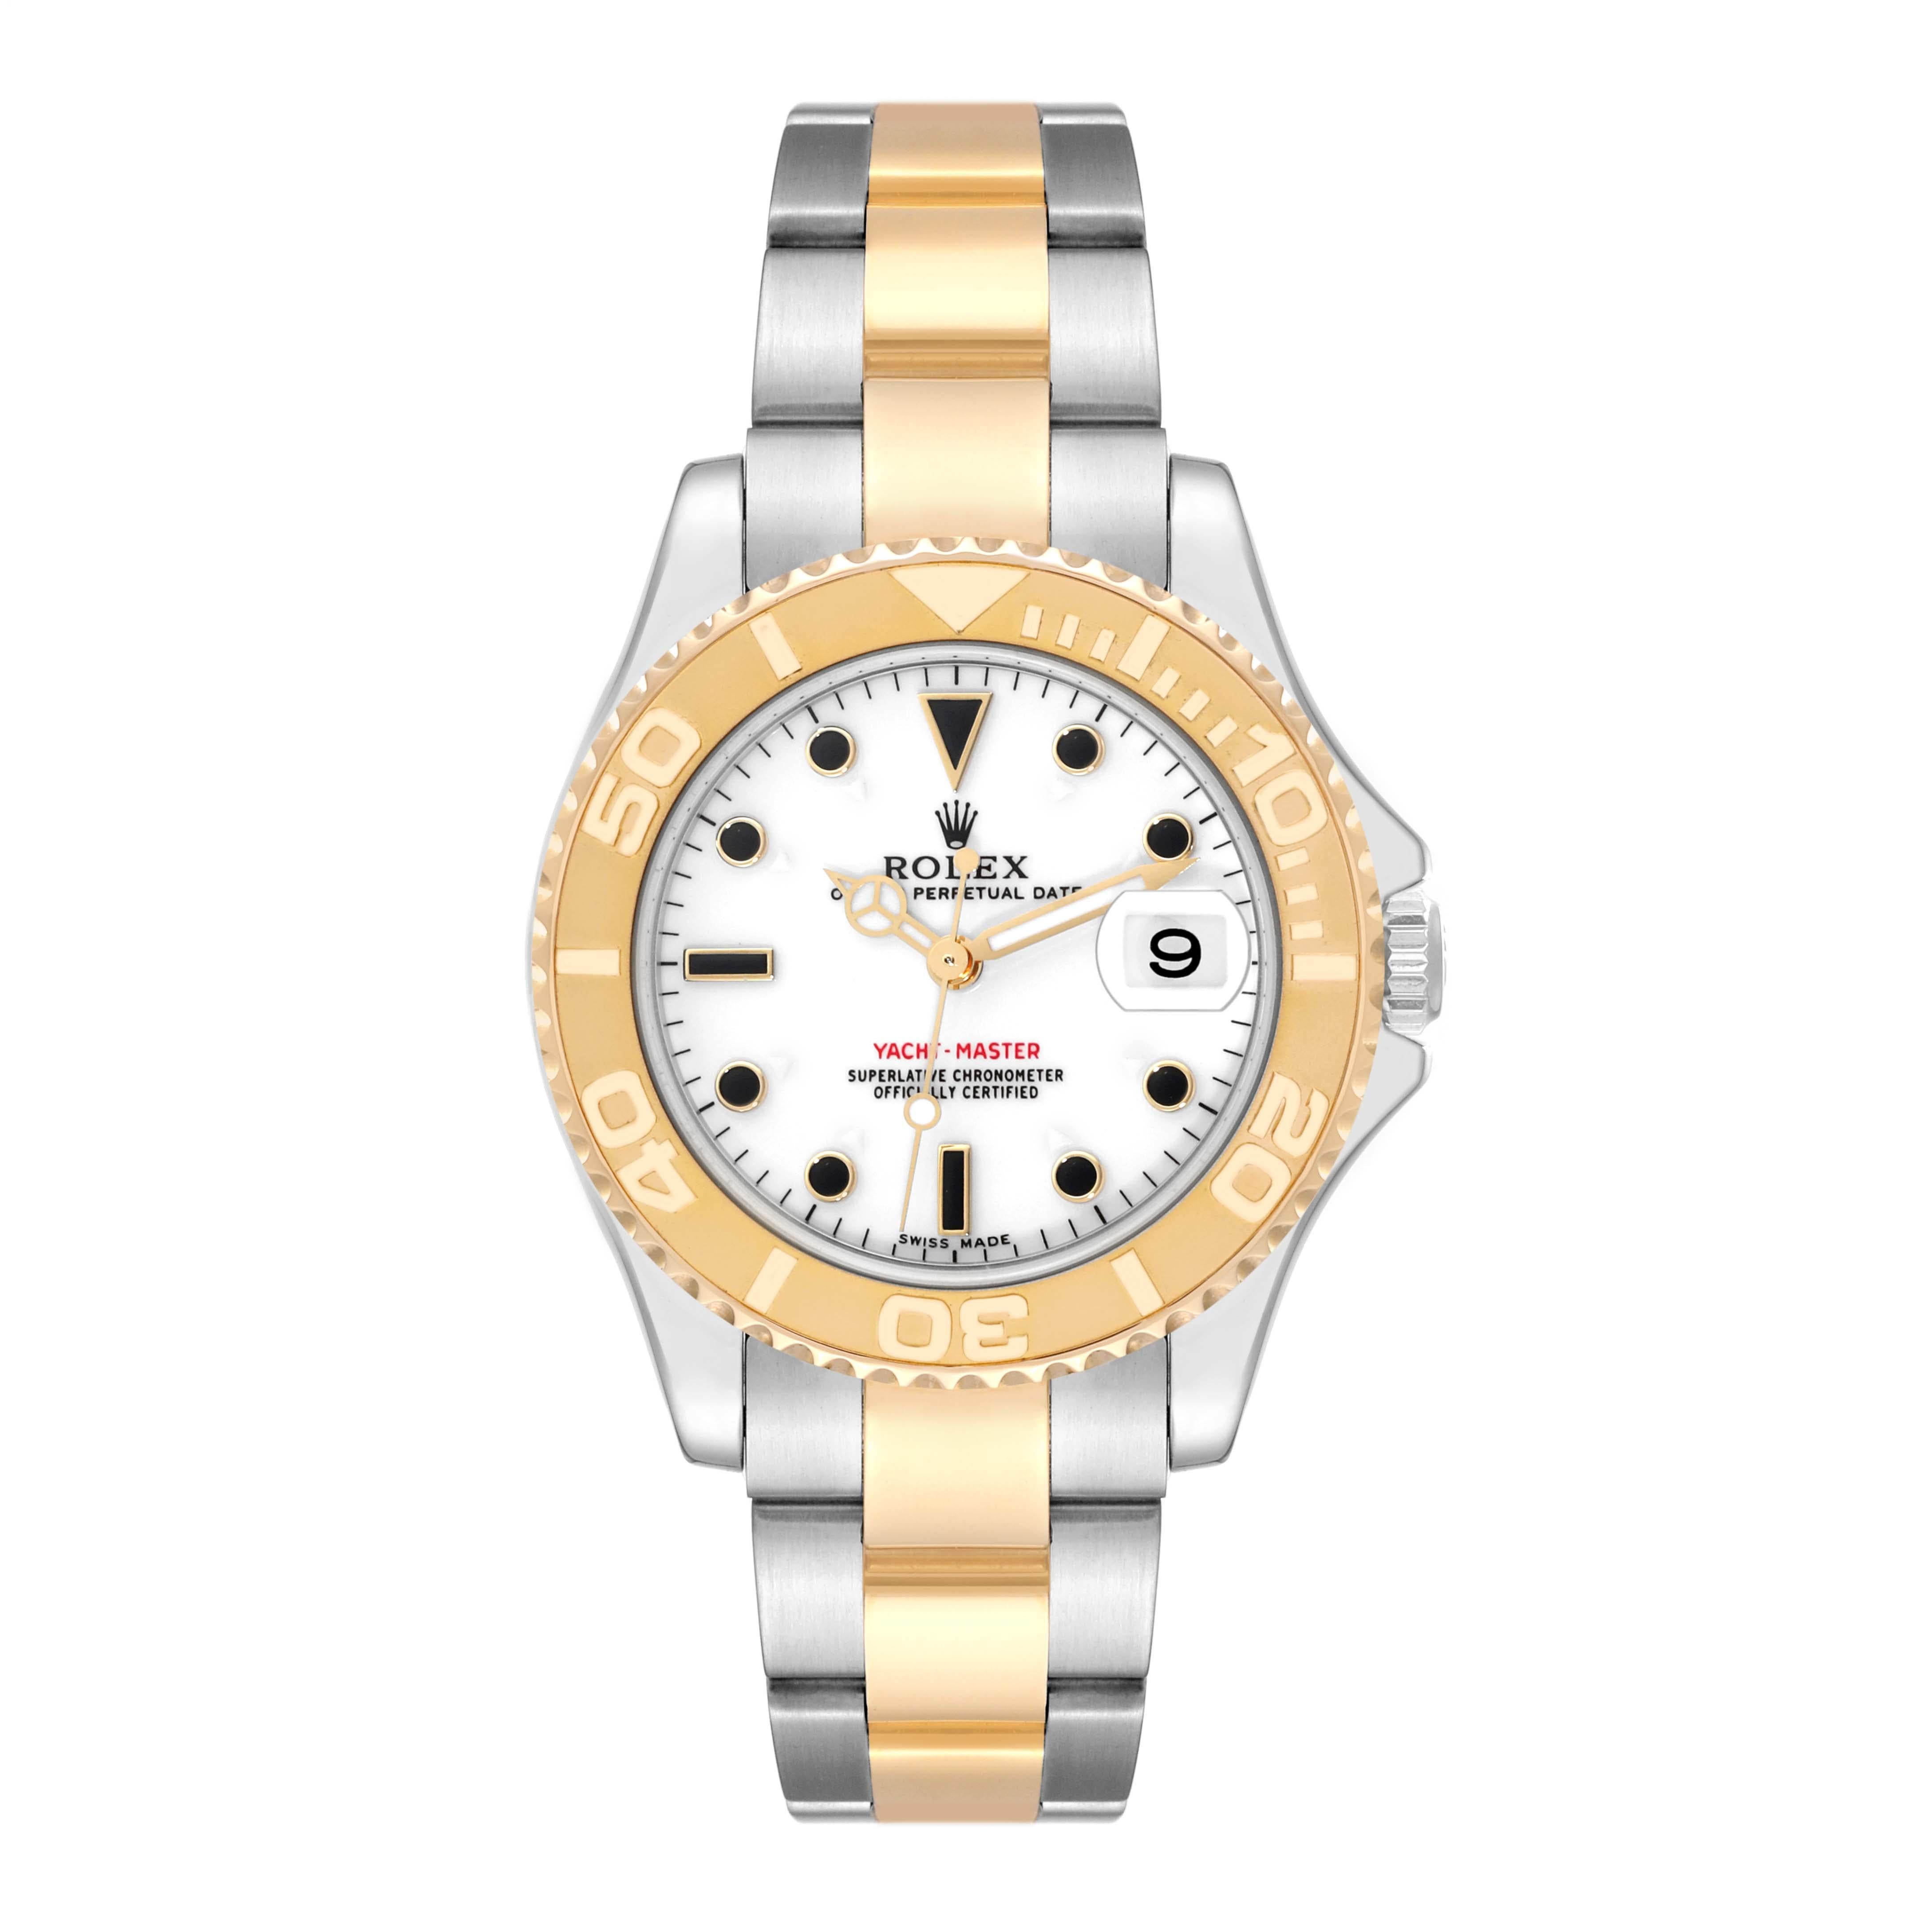 Rolex Yachtmaster Midsize Steel Yellow Gold Mens Watch 168623 Box Papers. Officially certified chronometer automatic self-winding movement. Stainless steel and 18K yellow gold case 35 mm in diameter. Rolex logo on a crown. 18K yellow gold special